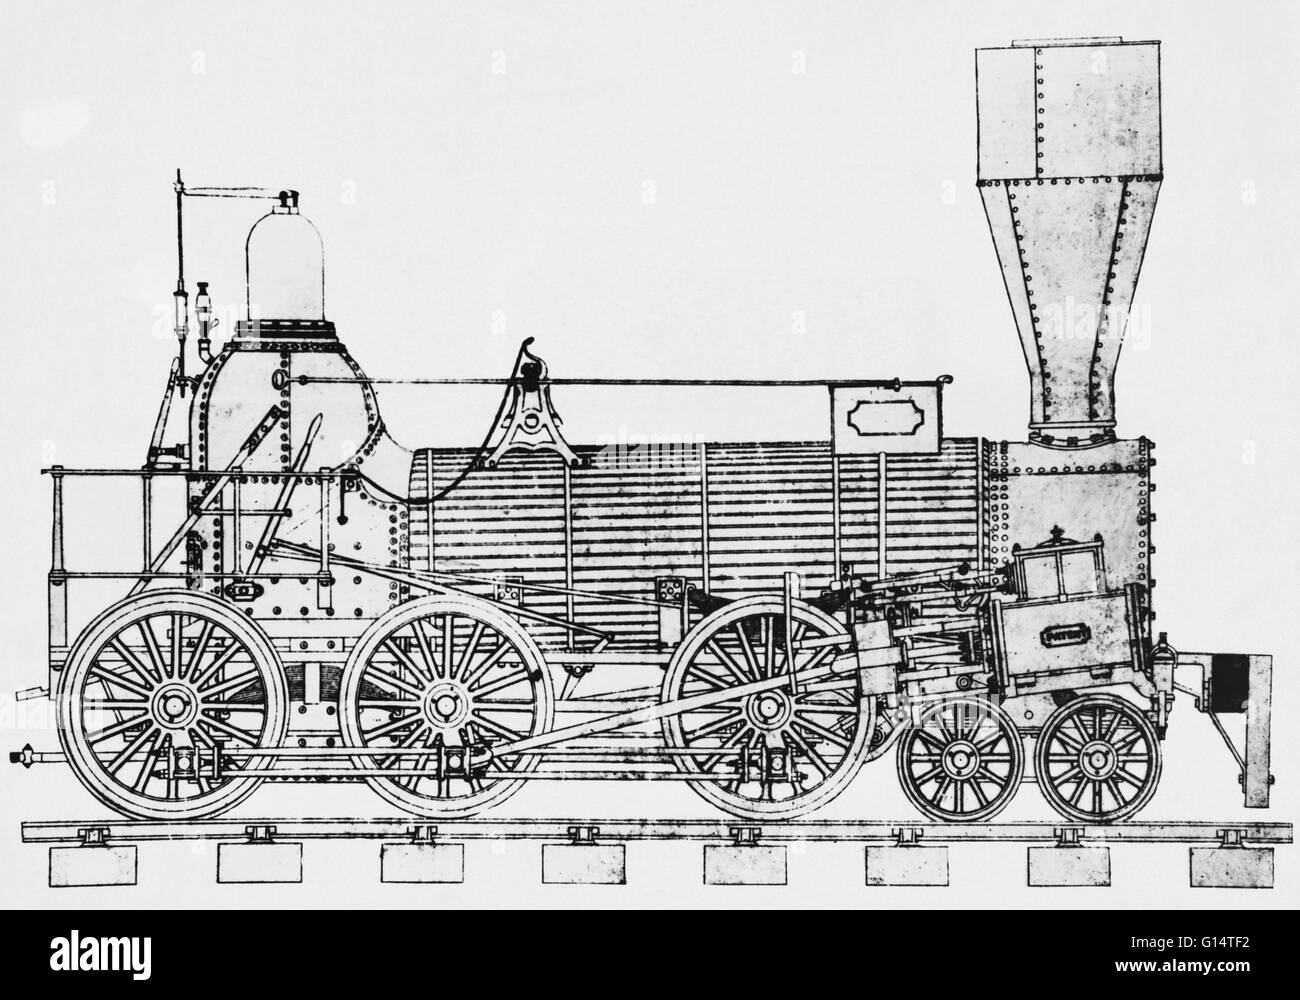 The Chesapeake, designed by Septimus Norris and built in 1847, was the first practical engine with a 4-6-0 wheel arrangement, (10-wheeler).  The locomotive weighed about 20 tons.  It had no cab. Stock Photo